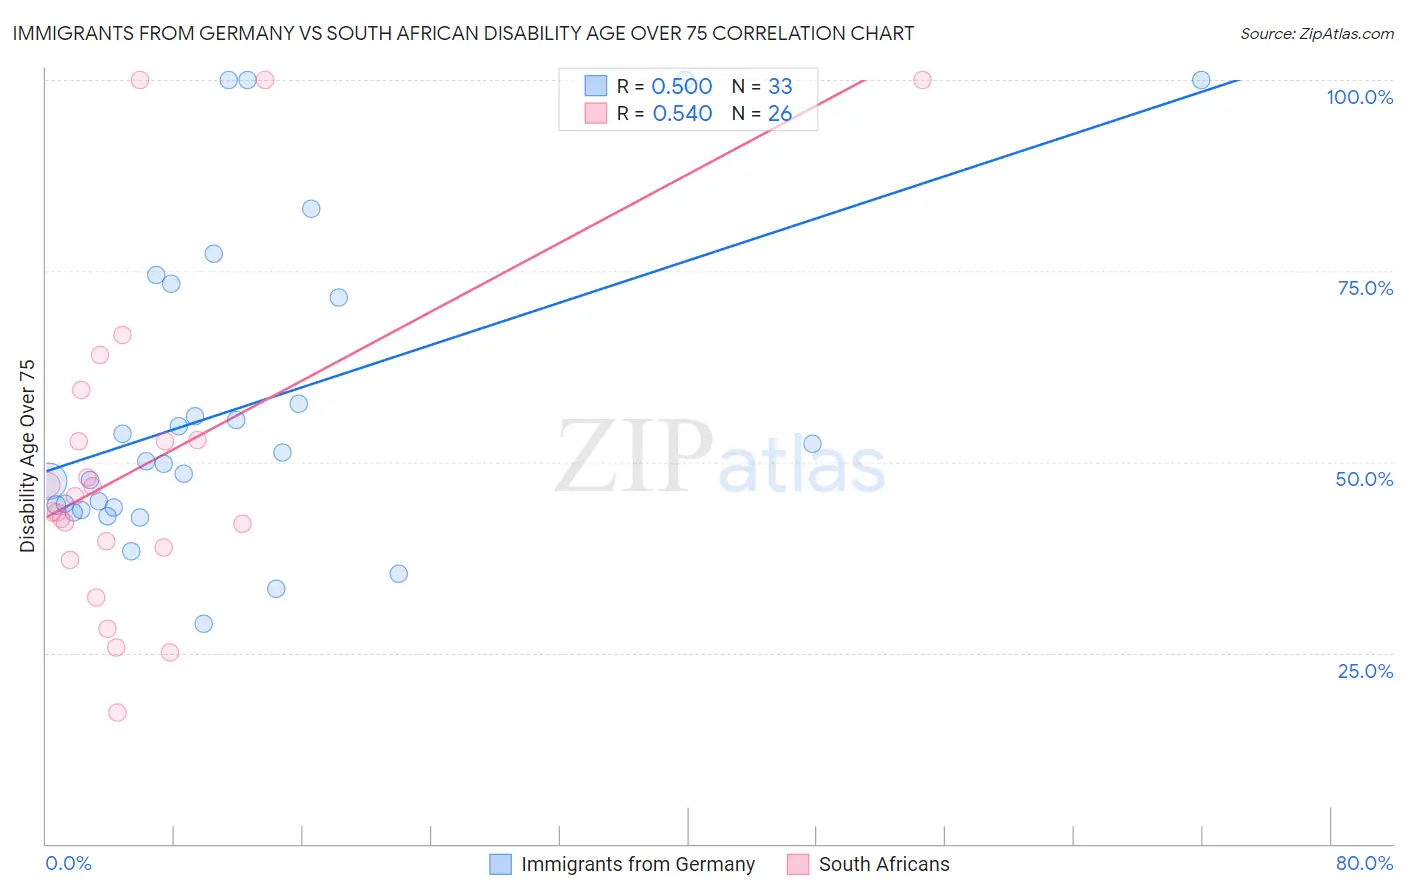 Immigrants from Germany vs South African Disability Age Over 75